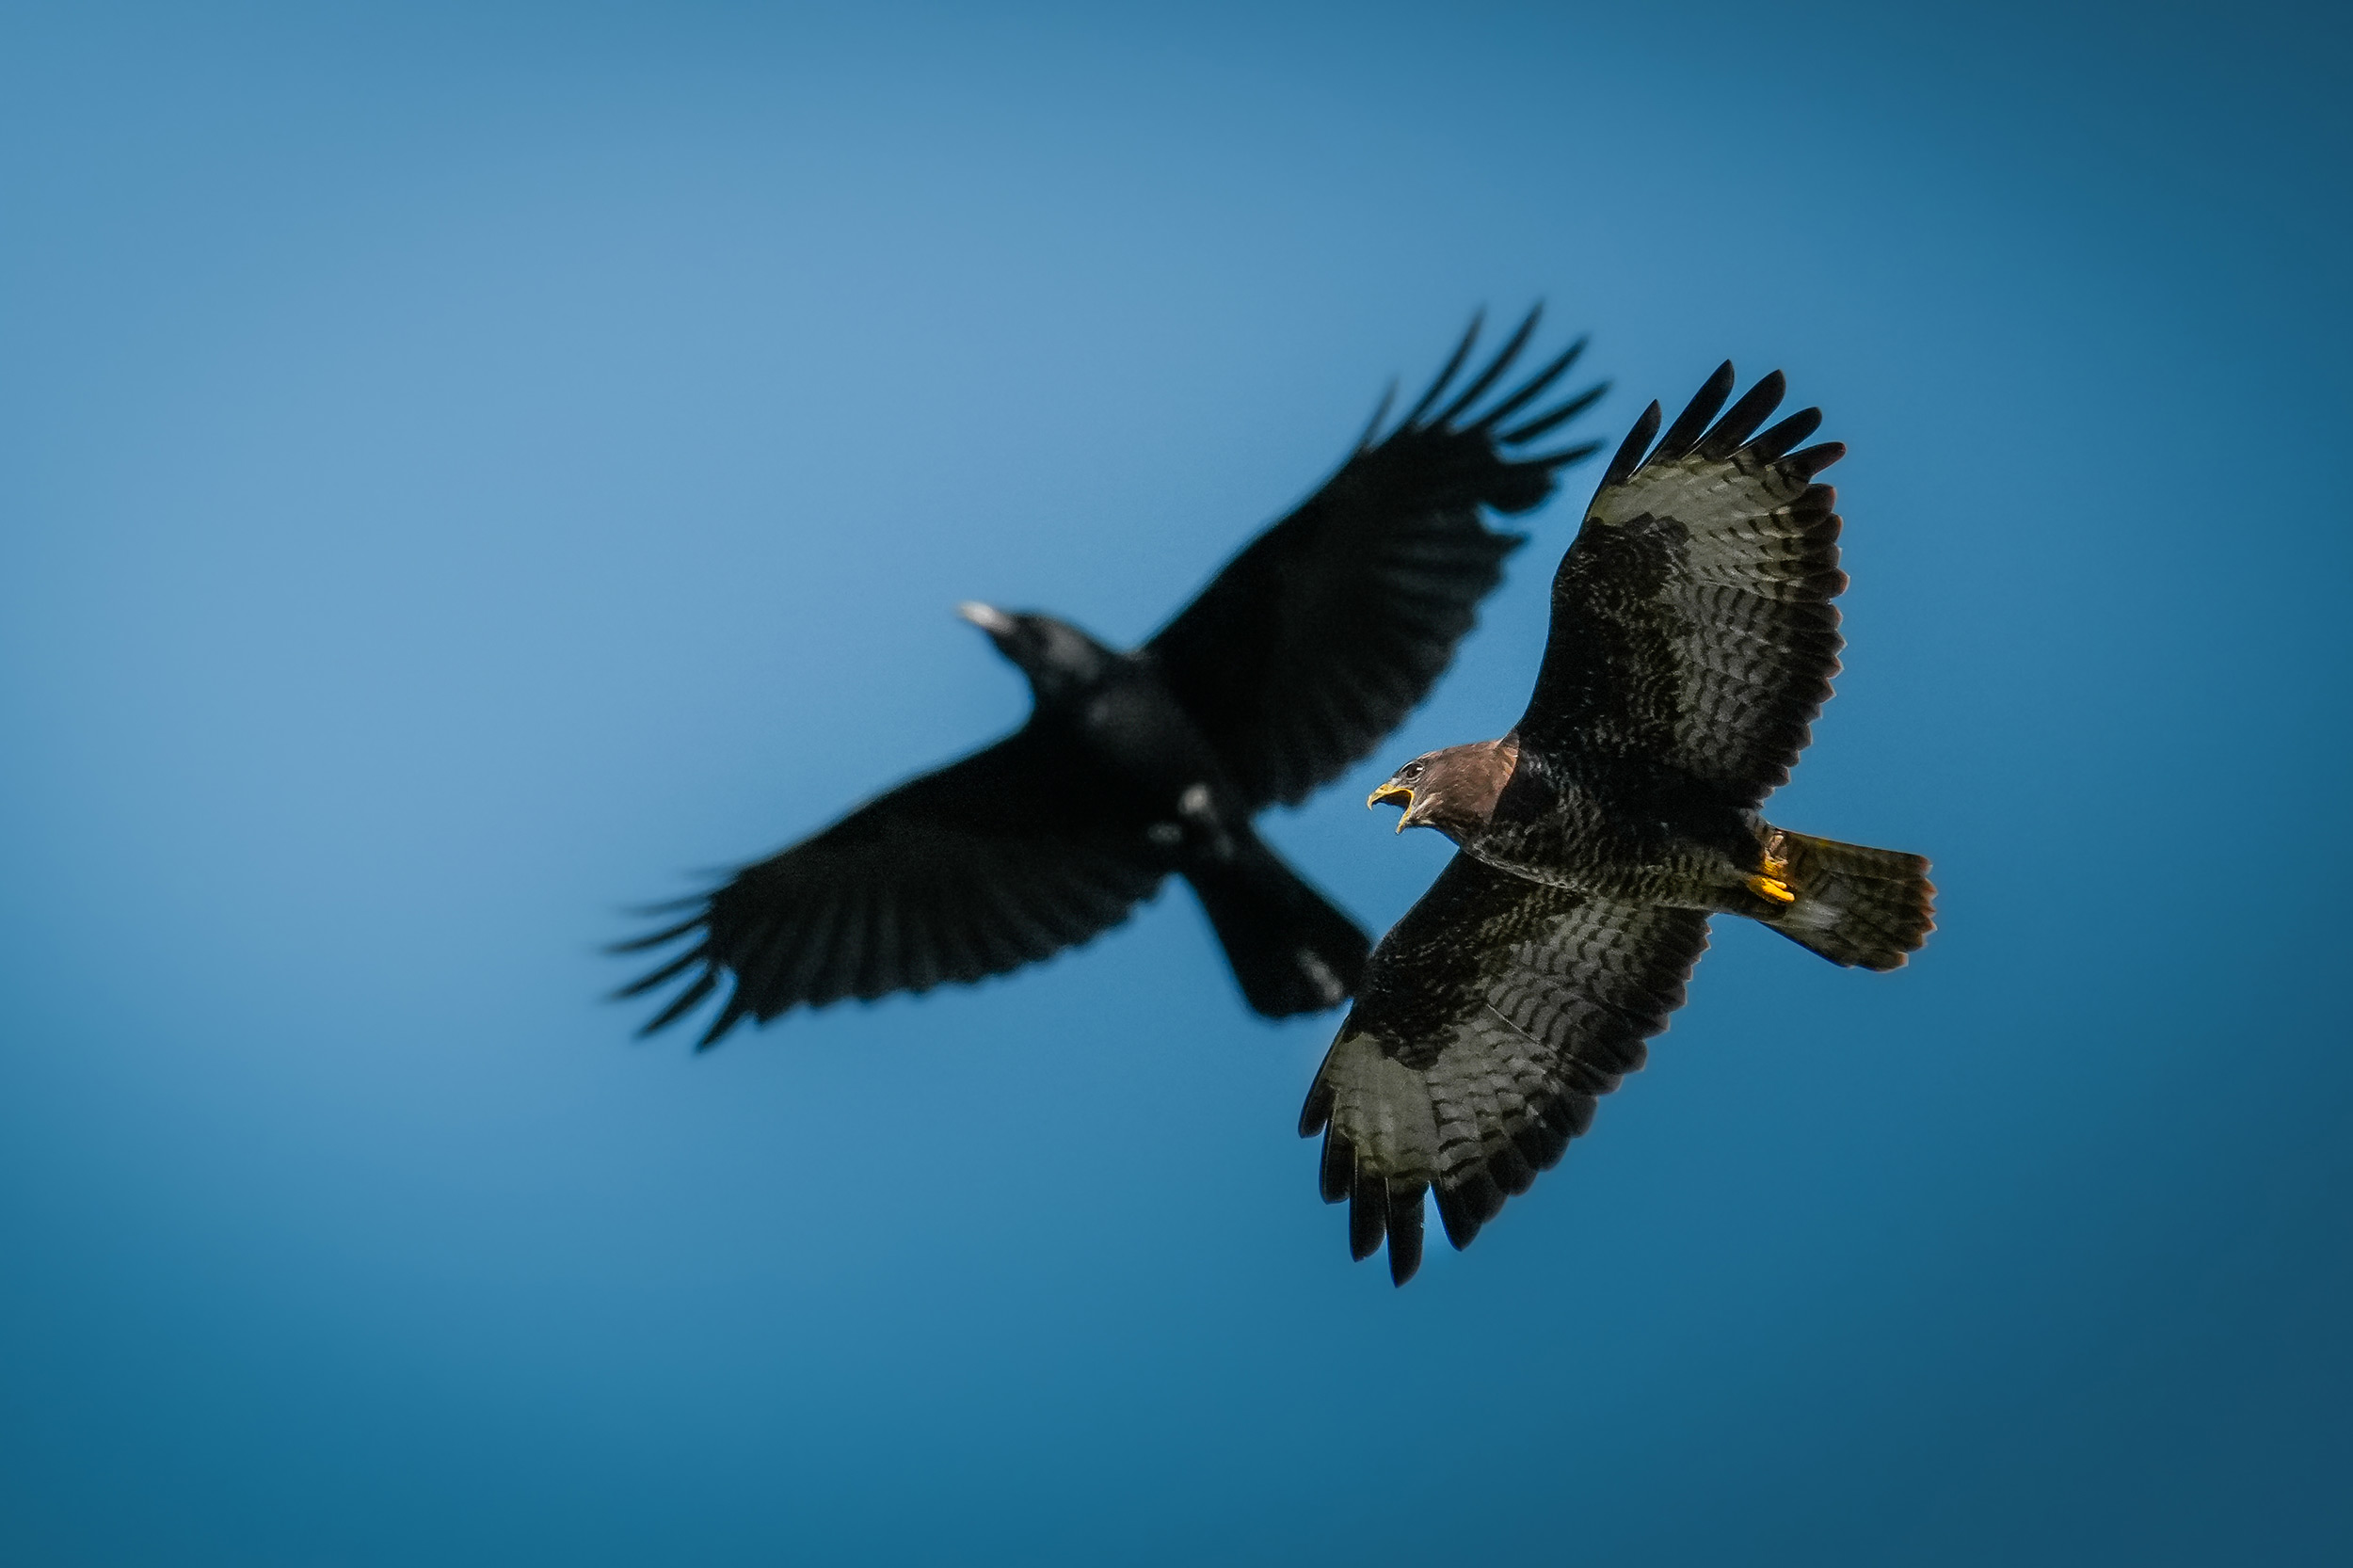 two-hawks-flying-together-in-the-sky.jpg